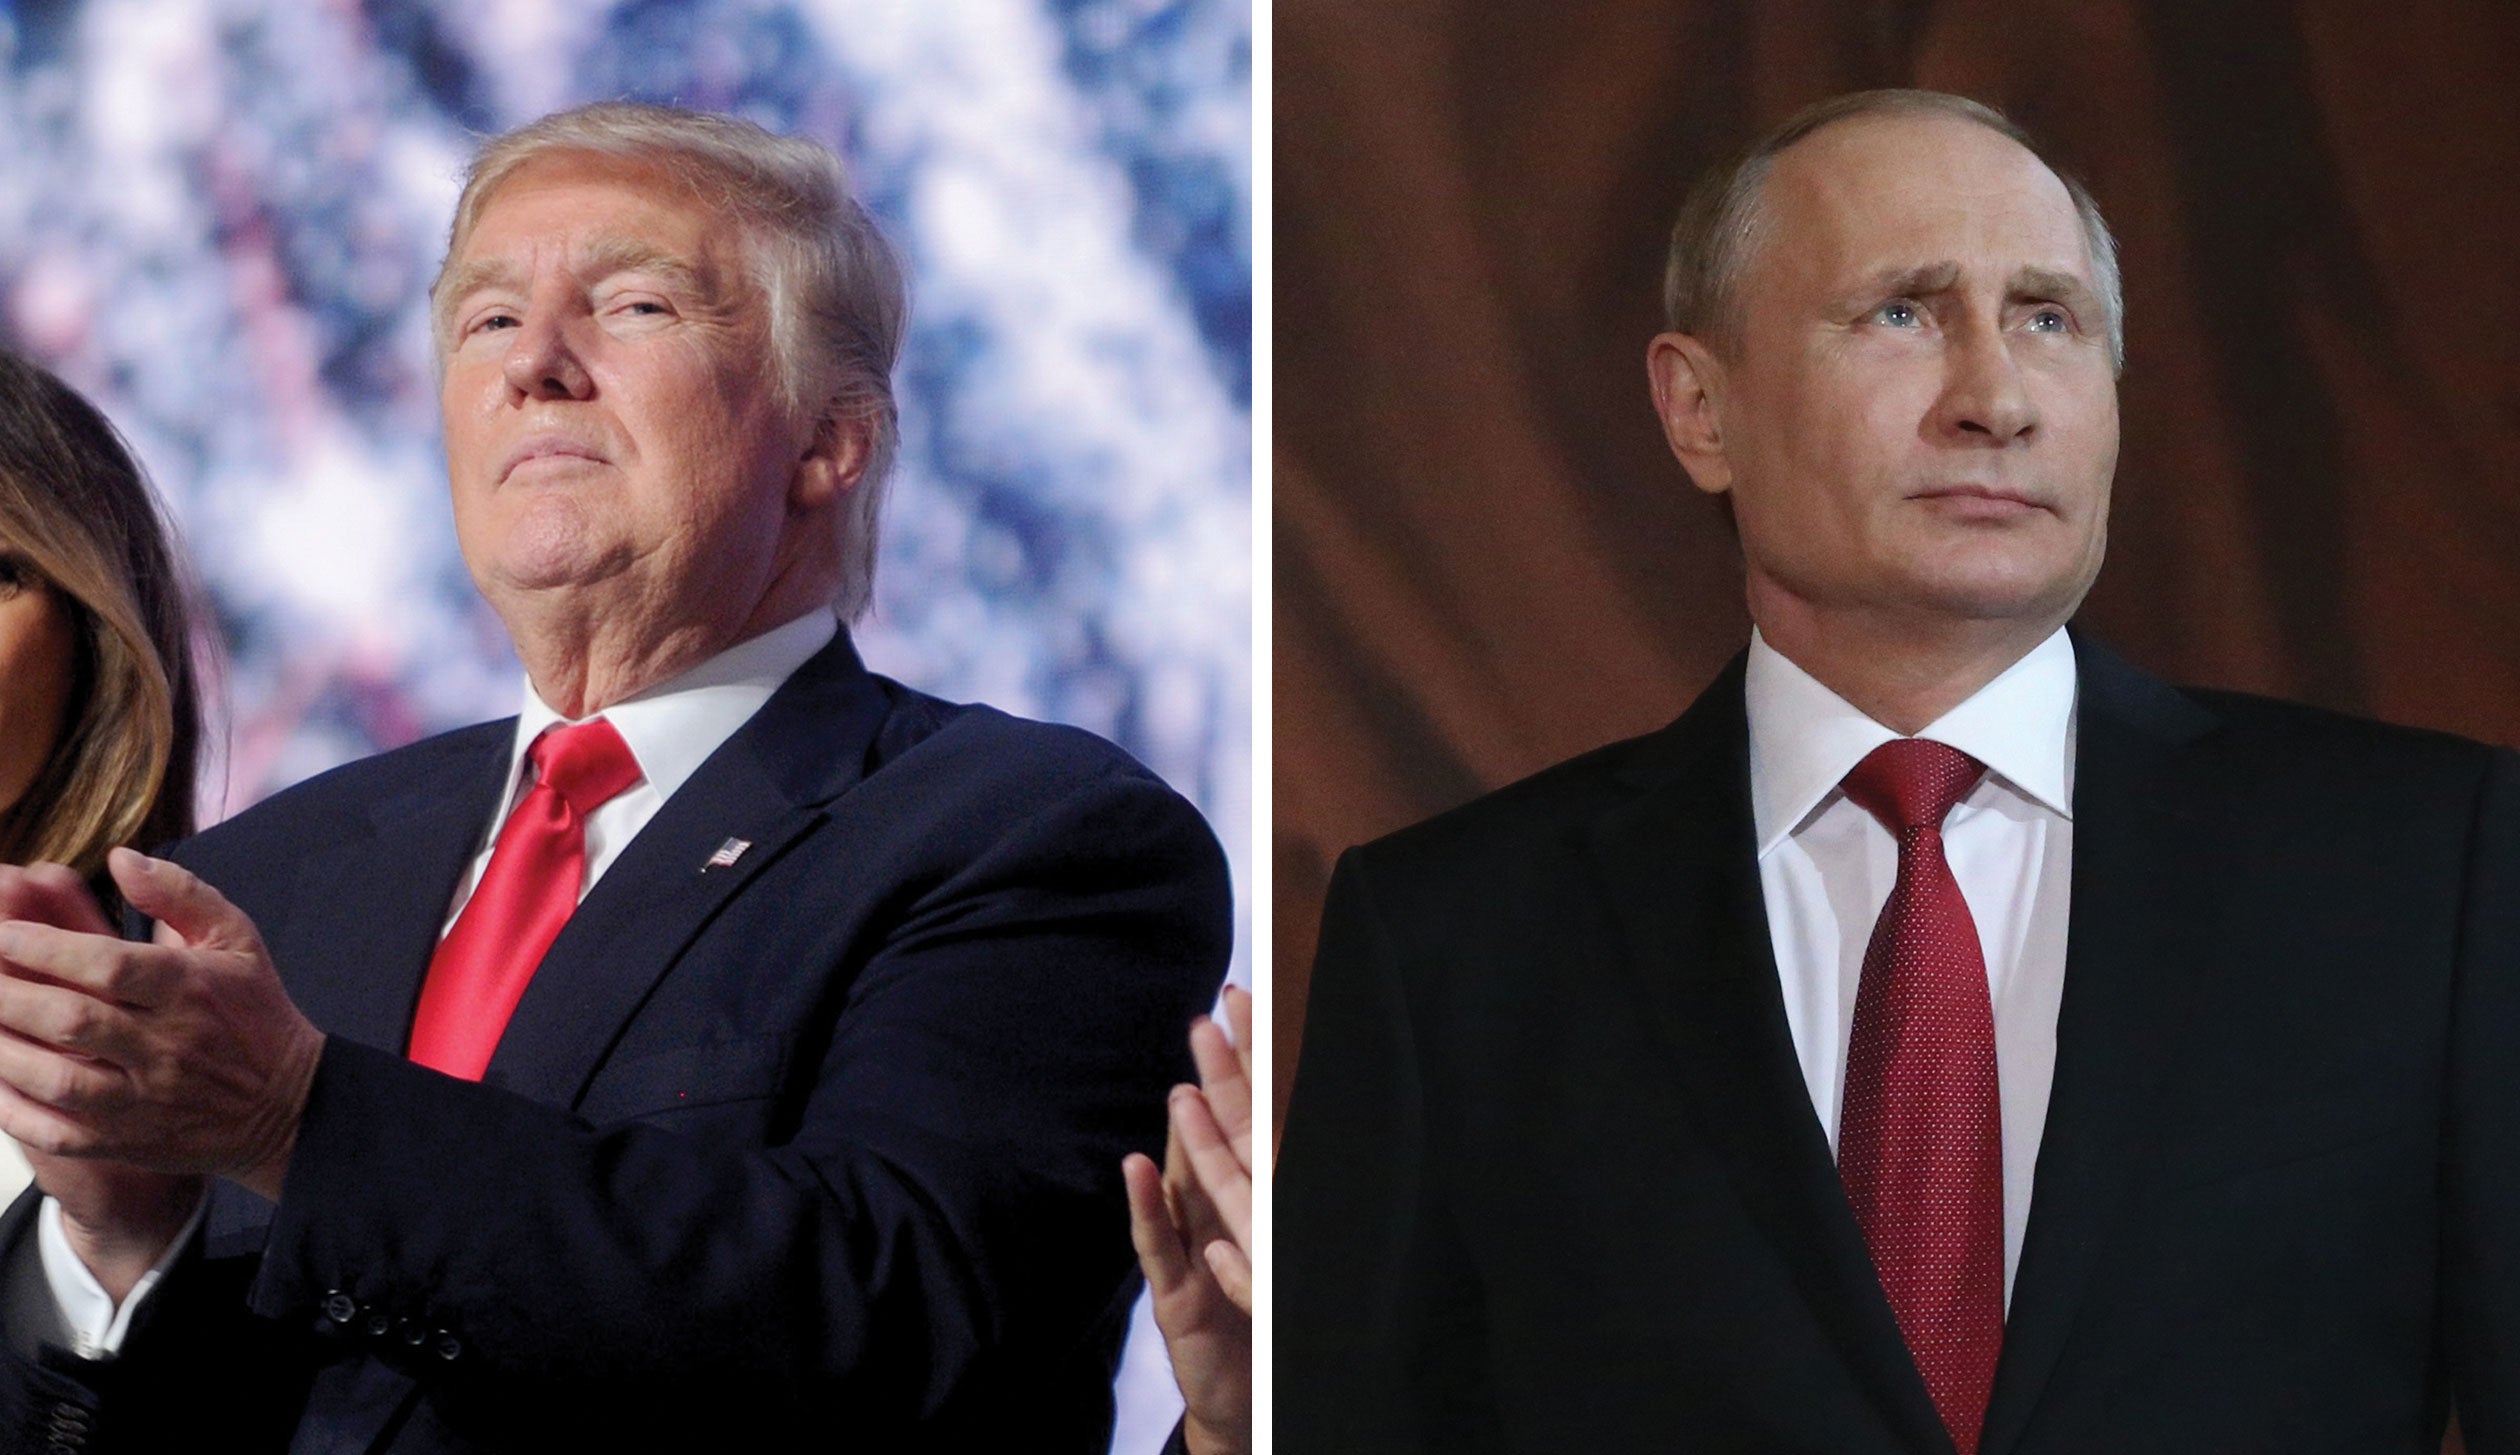 Trump and Putin to Meet With No 'Specific Agenda'